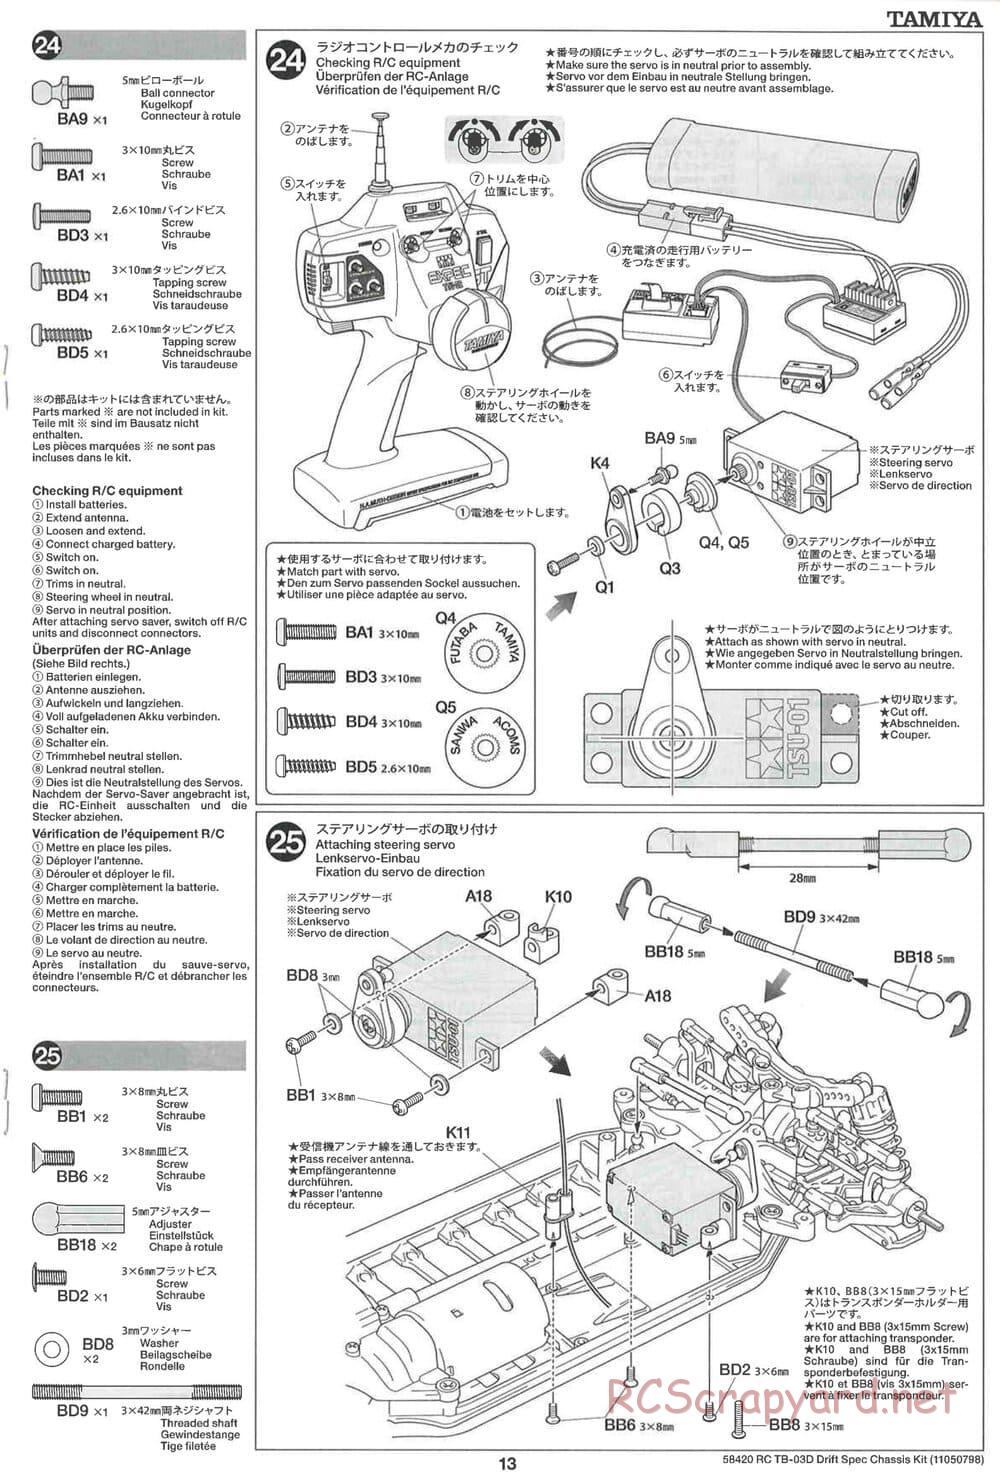 Tamiya - TB-03D HP Drift Spec Chassis - Manual - Page 13